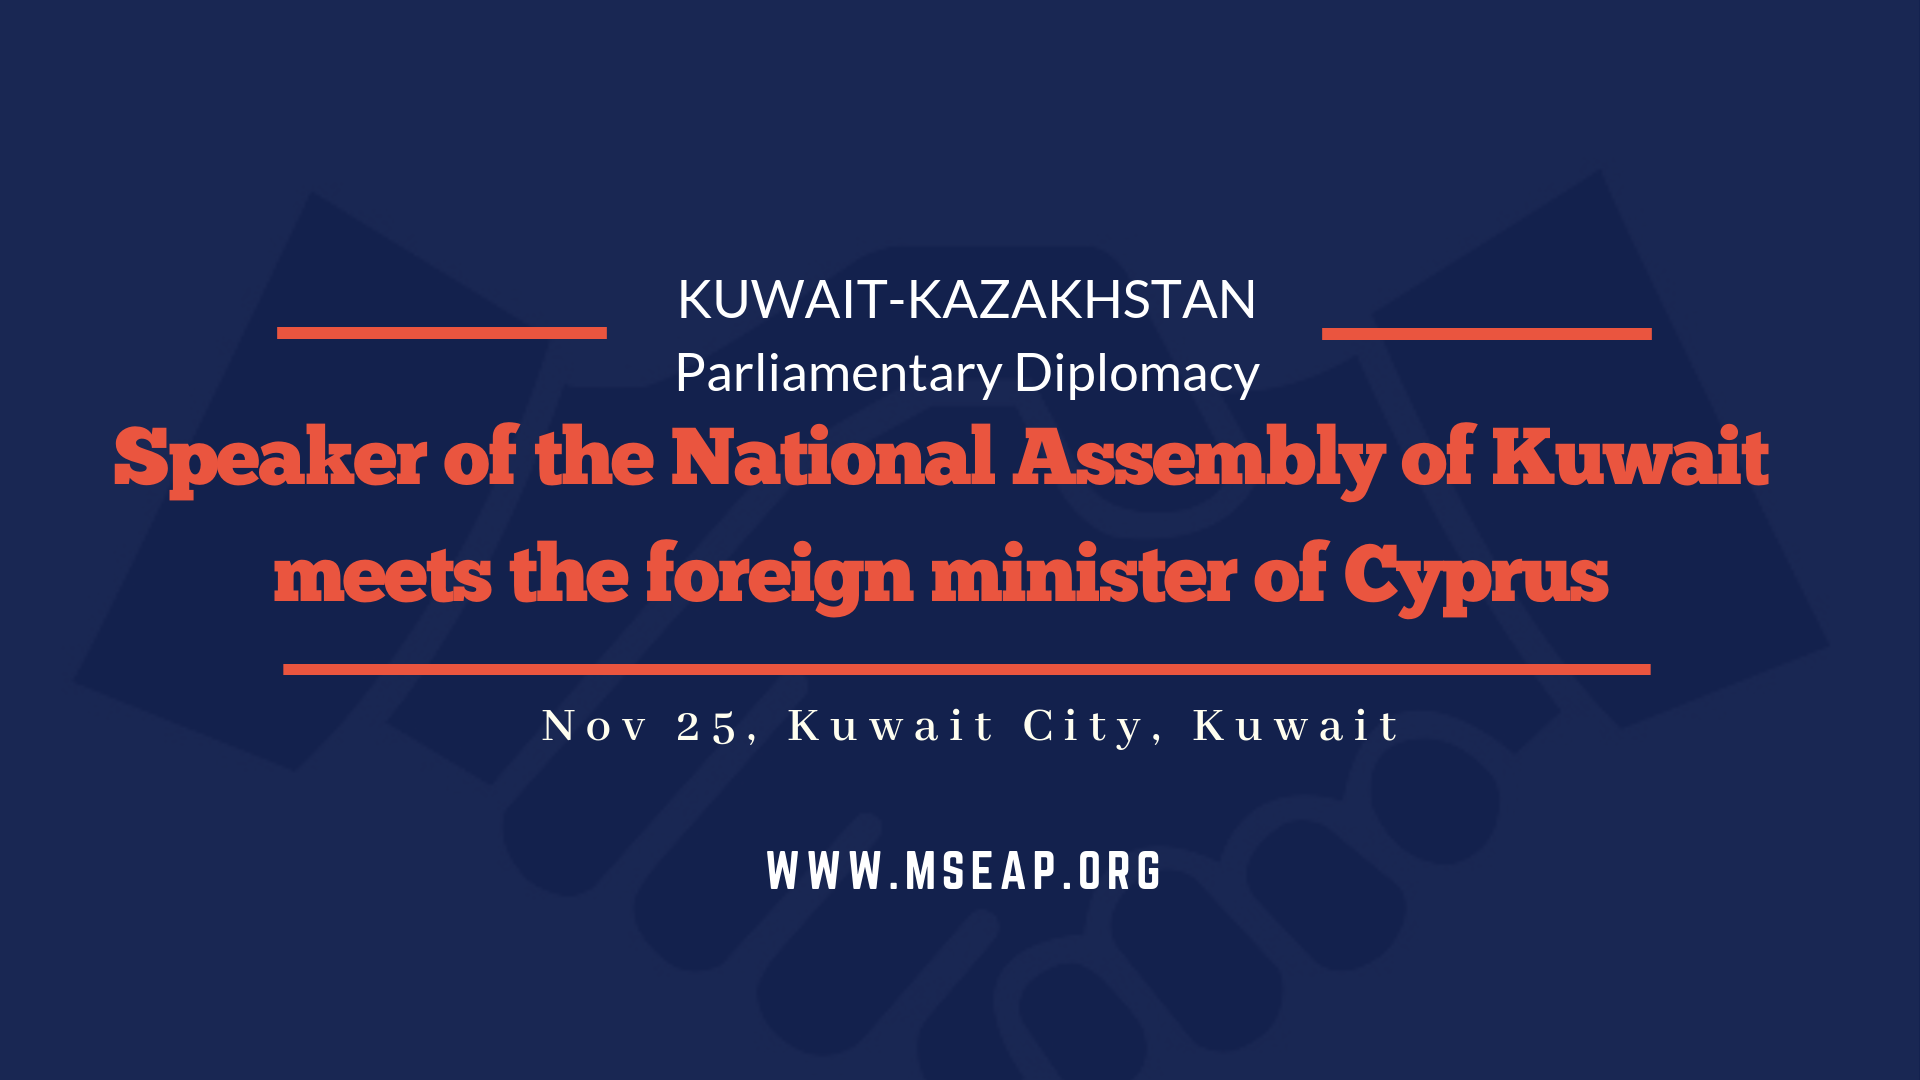 Speaker of the National Assembly of Kuwait receives an official visit from the foreign minister of Cyprus